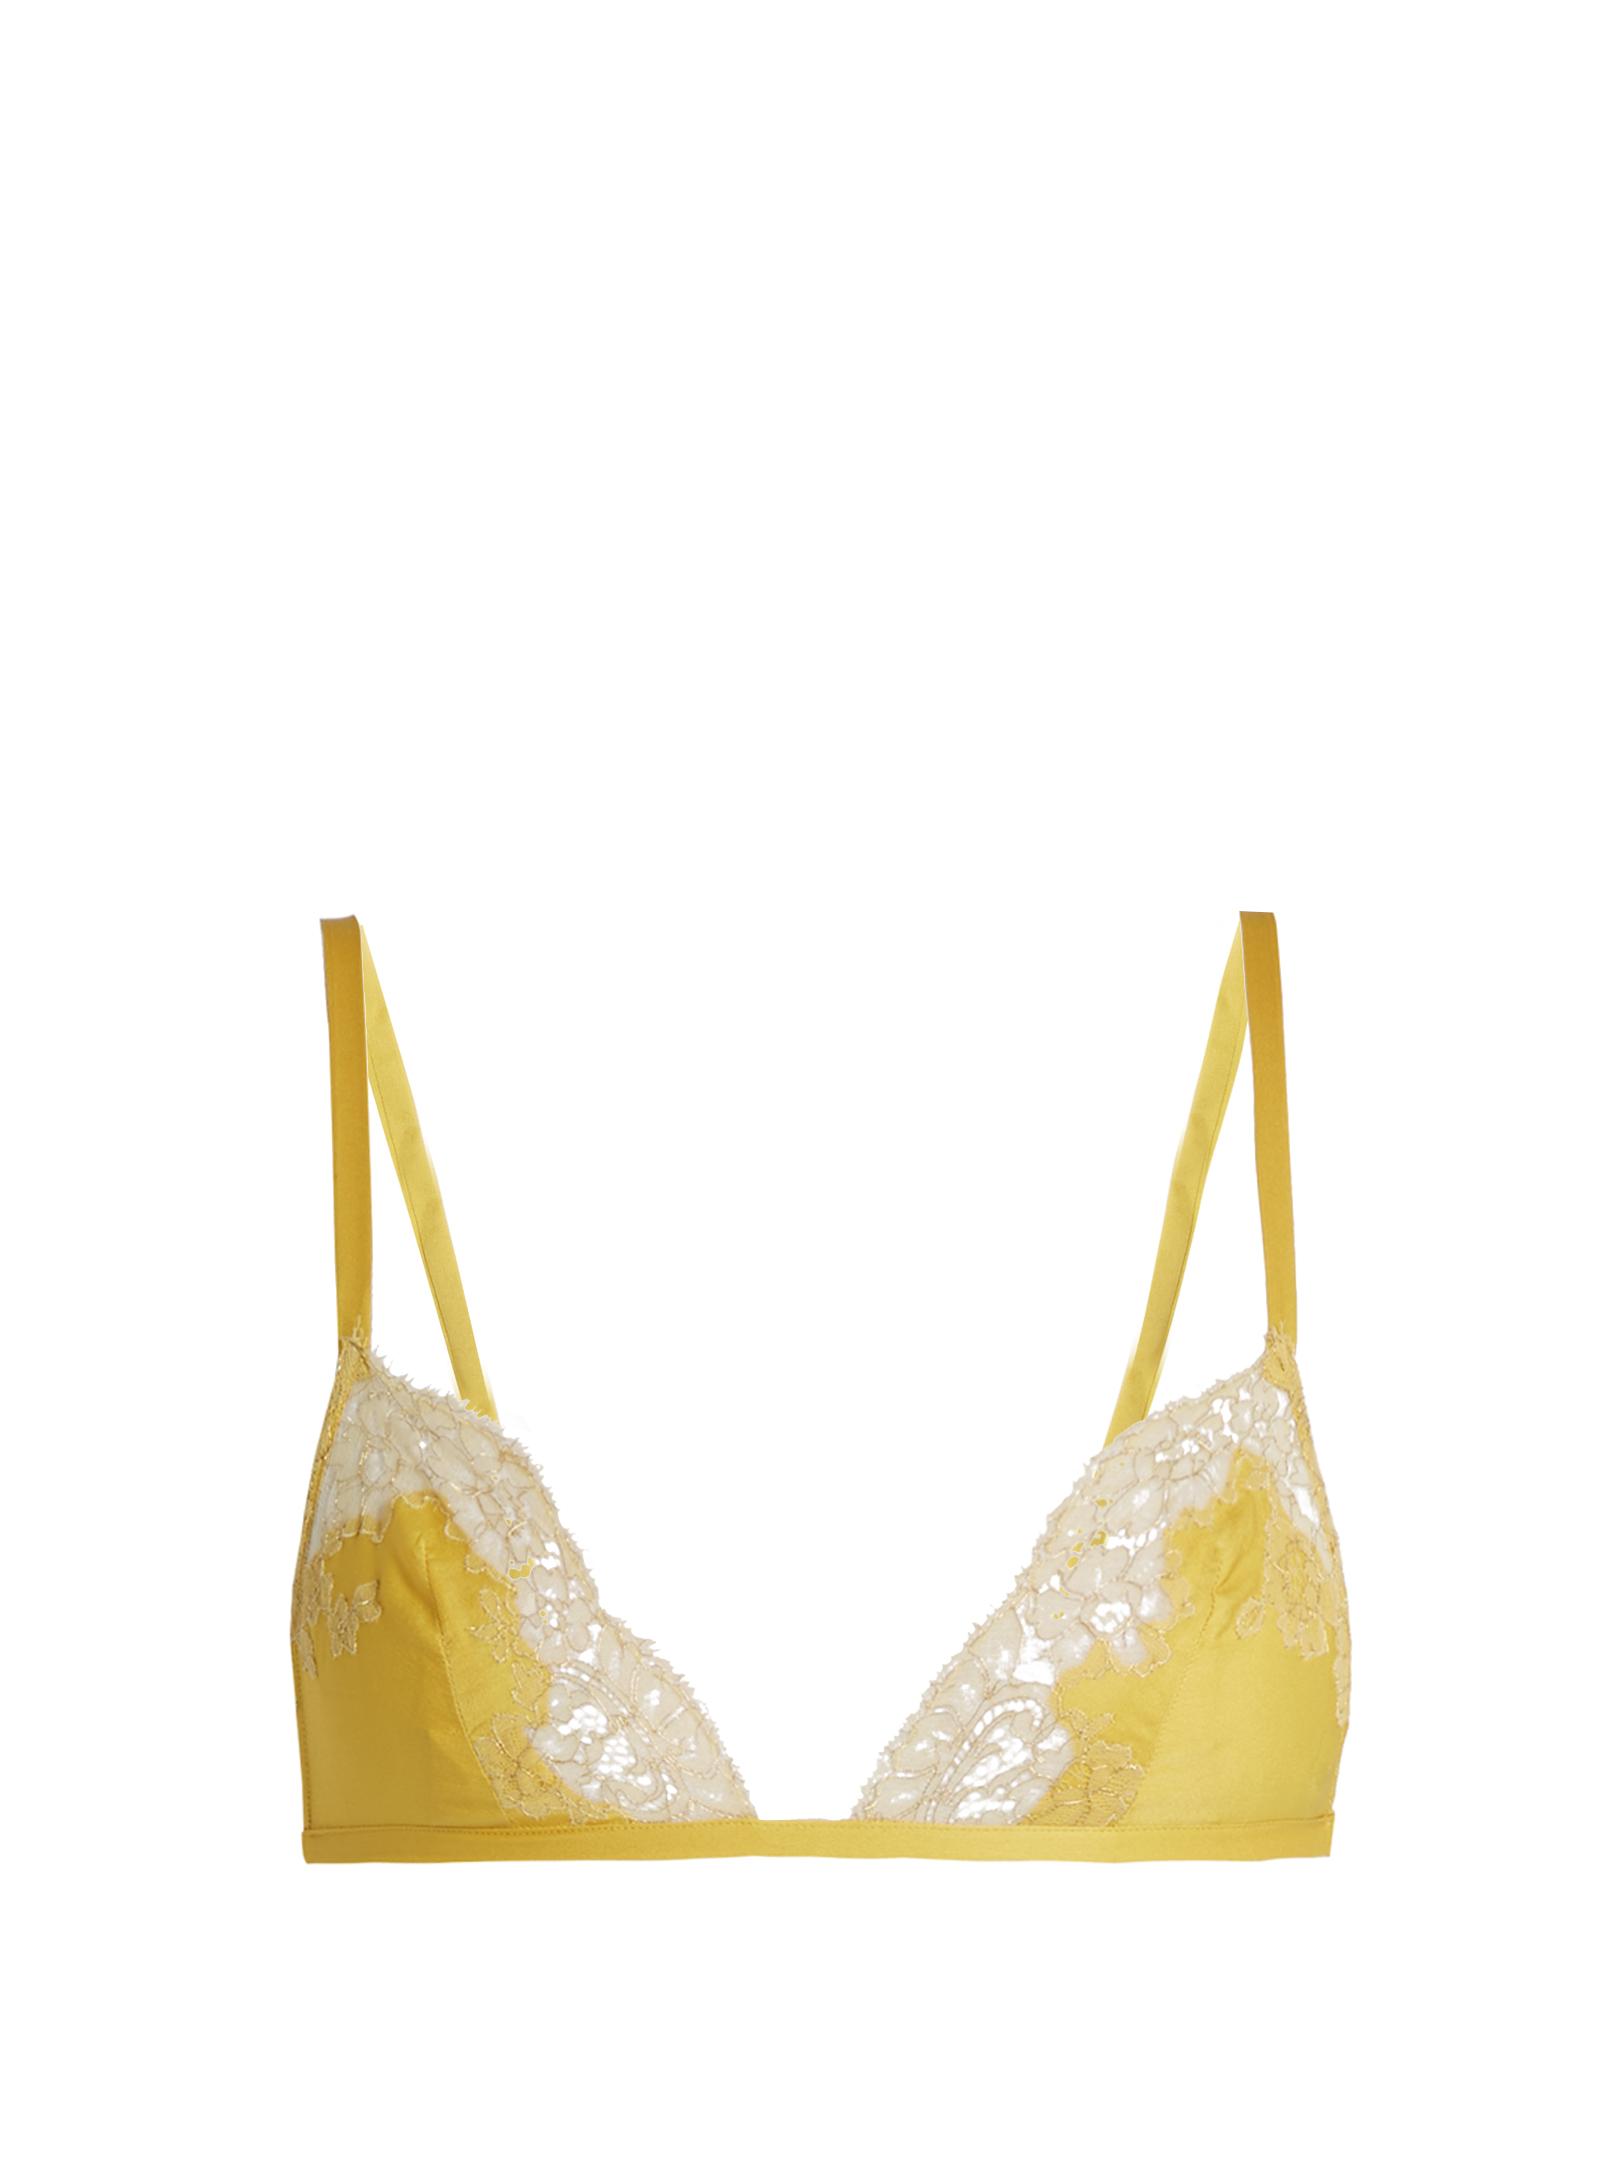 Carine gilson Lace-trimmed Silk-satin Soft-cup Bra in Yellow | Lyst